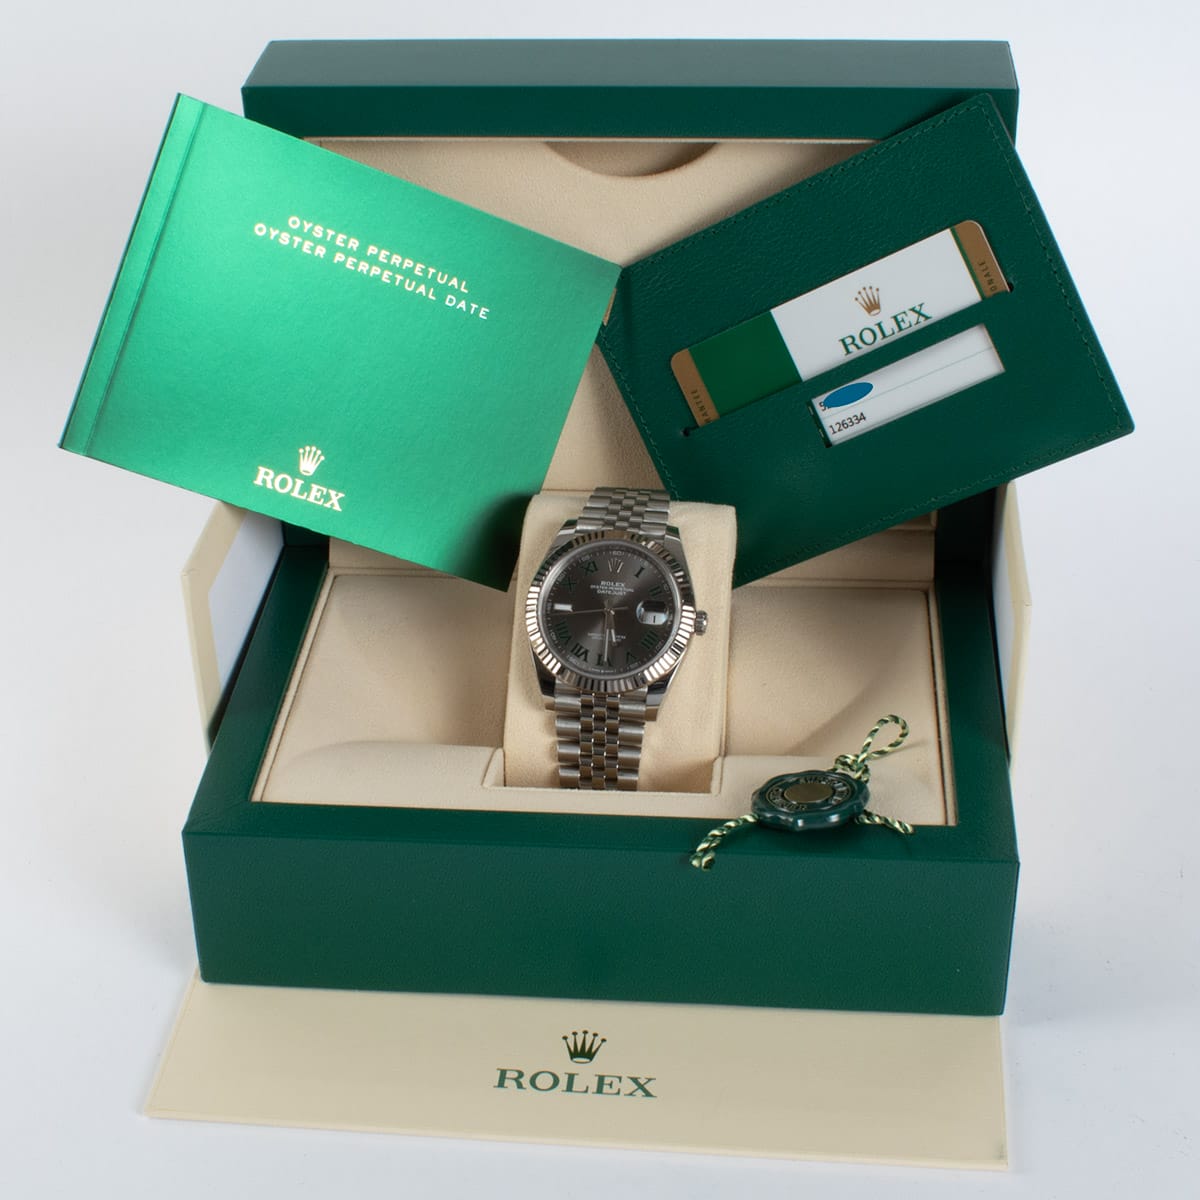 View in Box of Datejust 41 'Wimbledon'